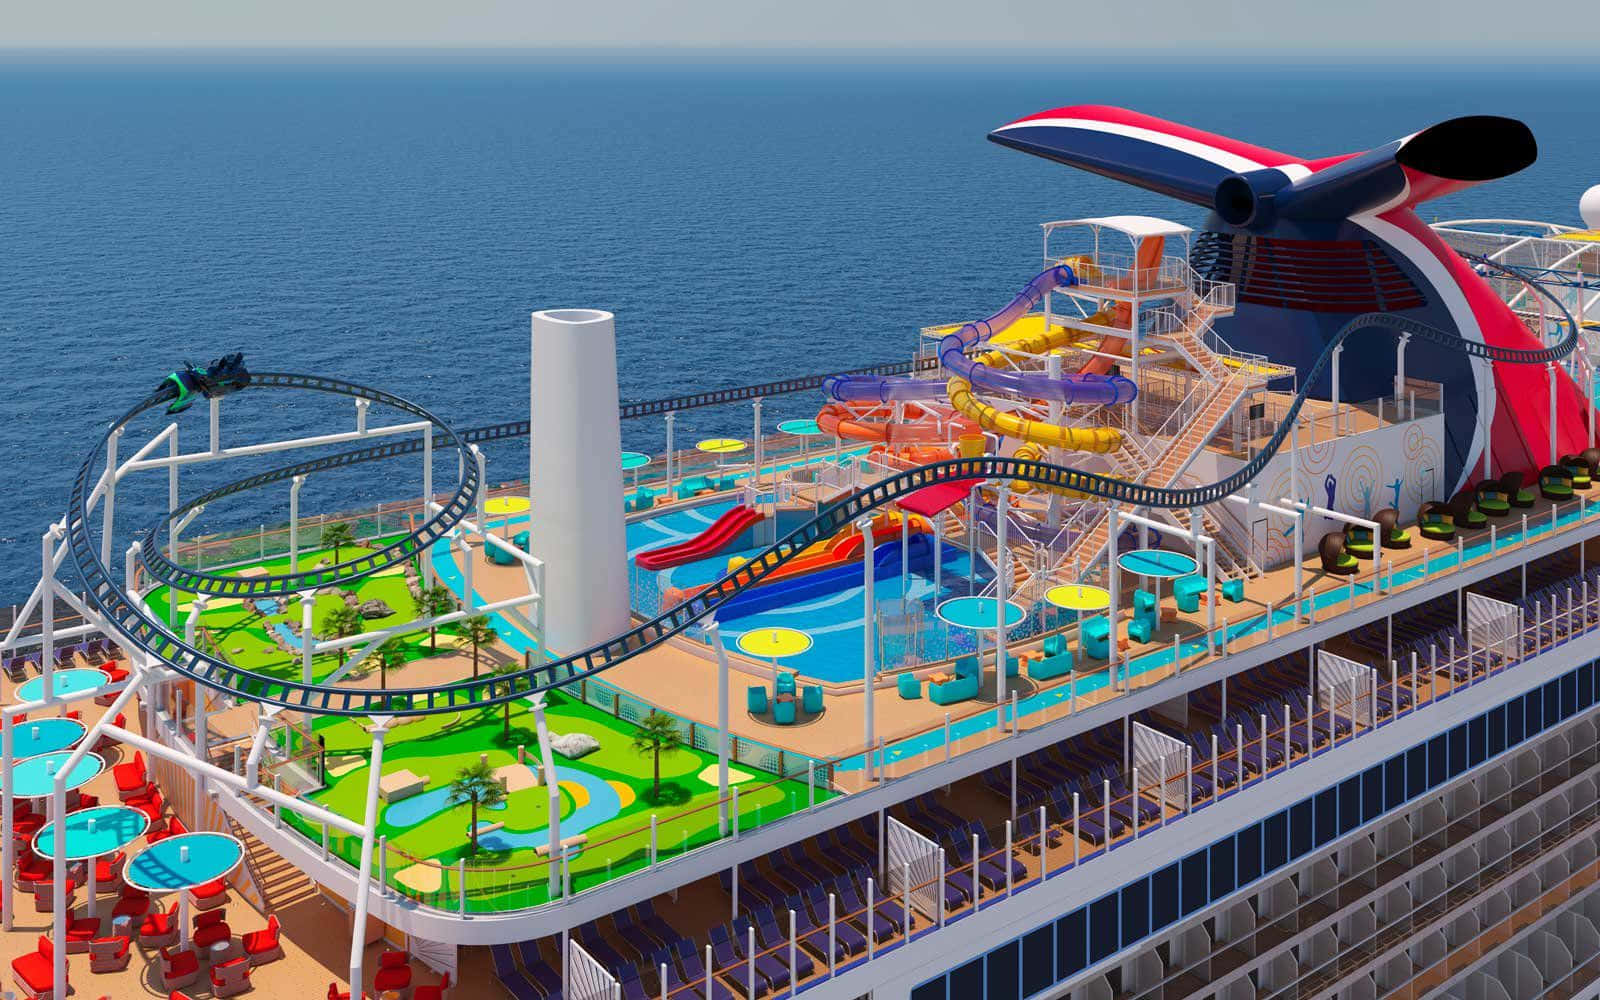 Step onboard Carnival Conquest – Relax, explore, and create long-lasting memories